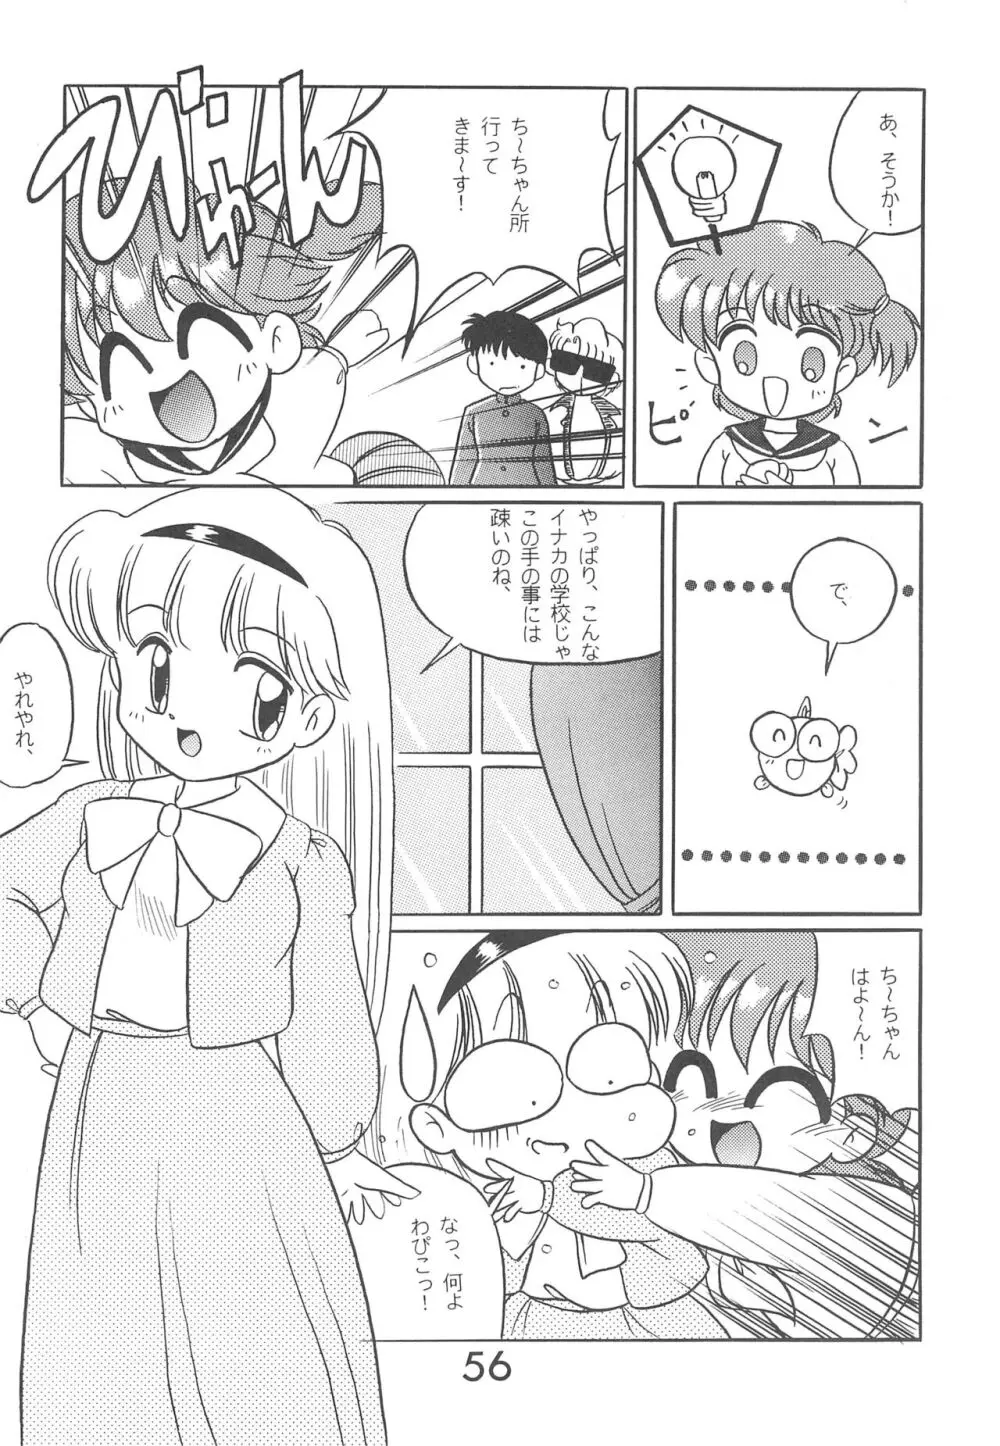 Fun House 9th Chame! - page56